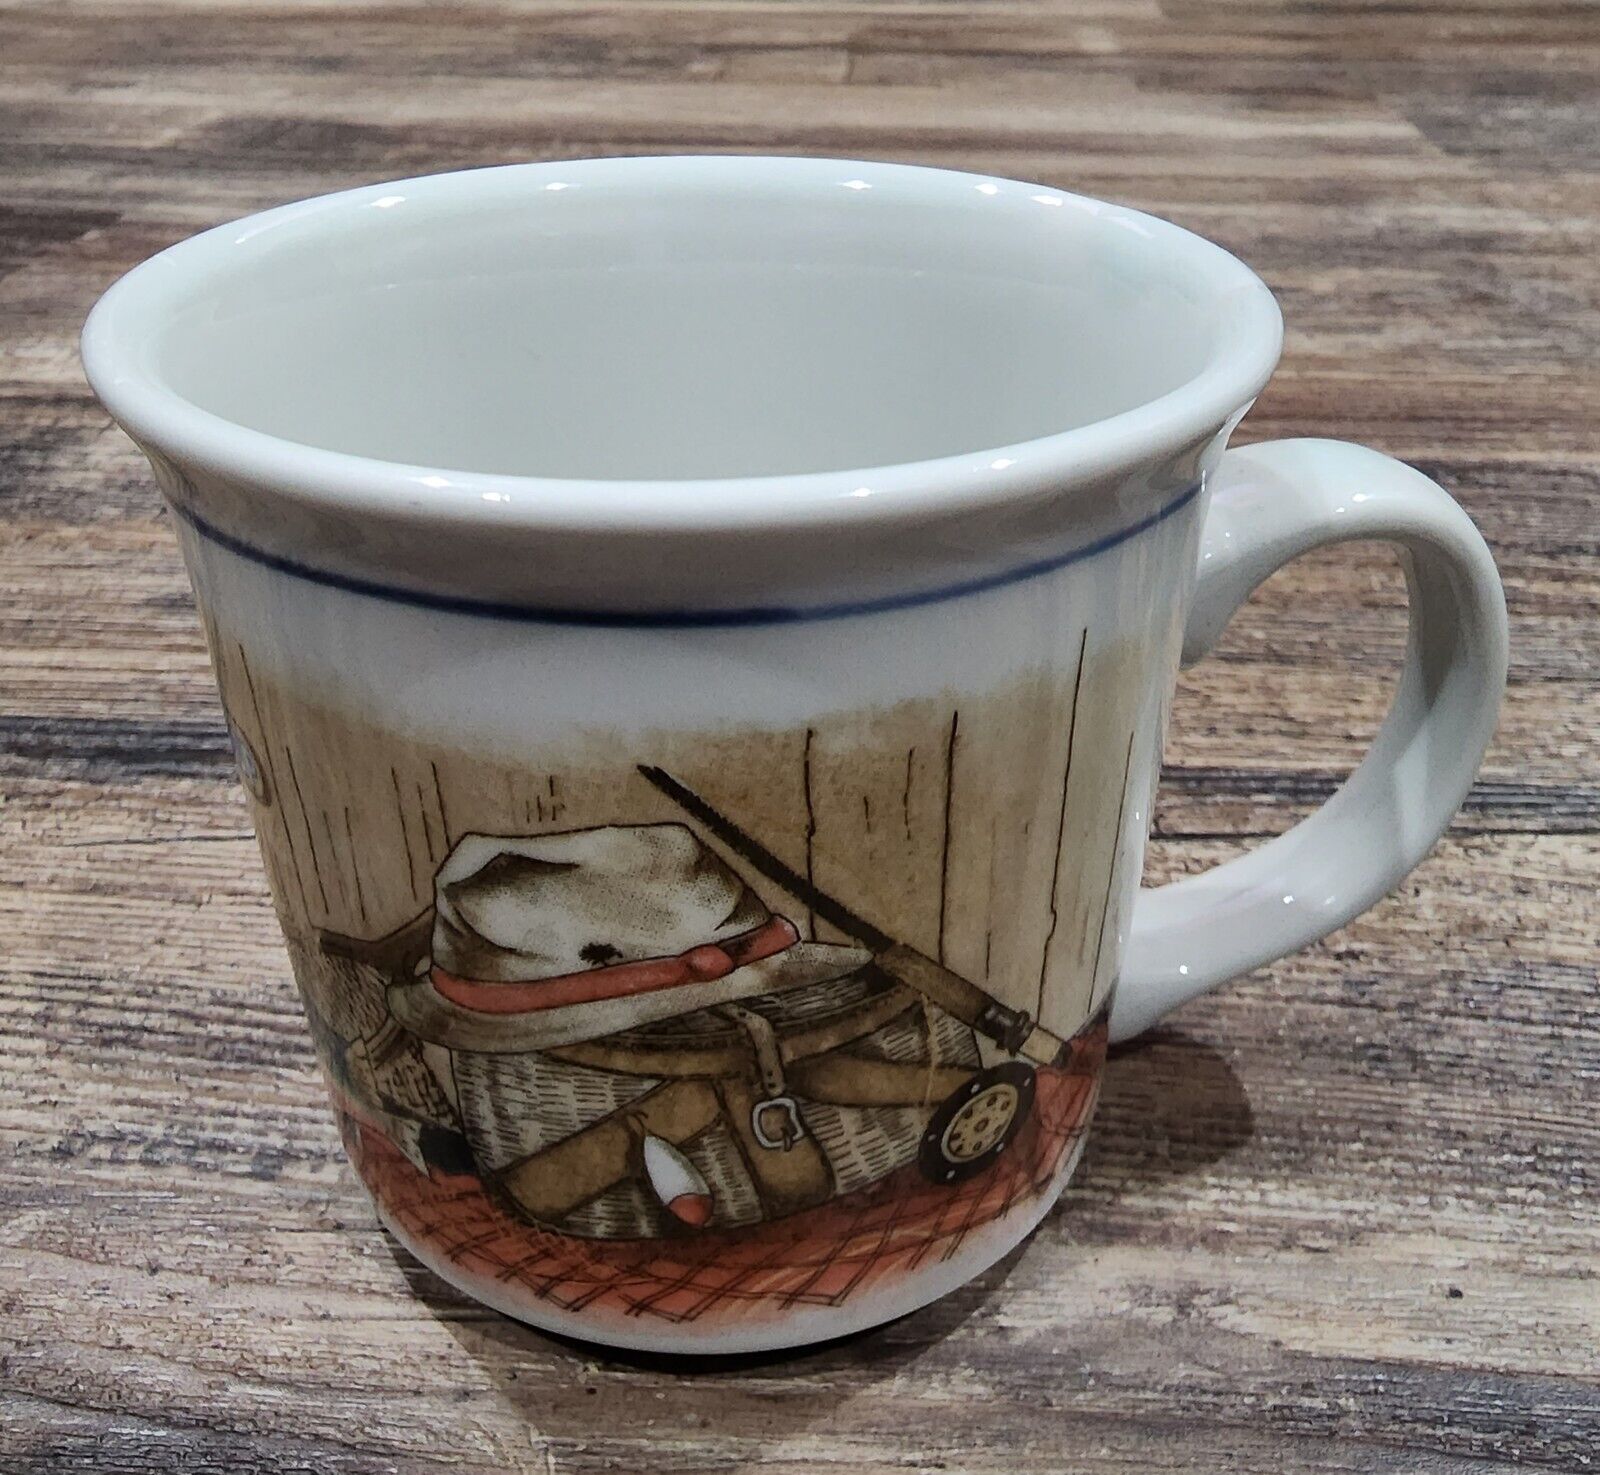 VTG OTAGIRI FLY FISHING TROUT COFFEE CUP JAPAN, Signed Ruth Pengal